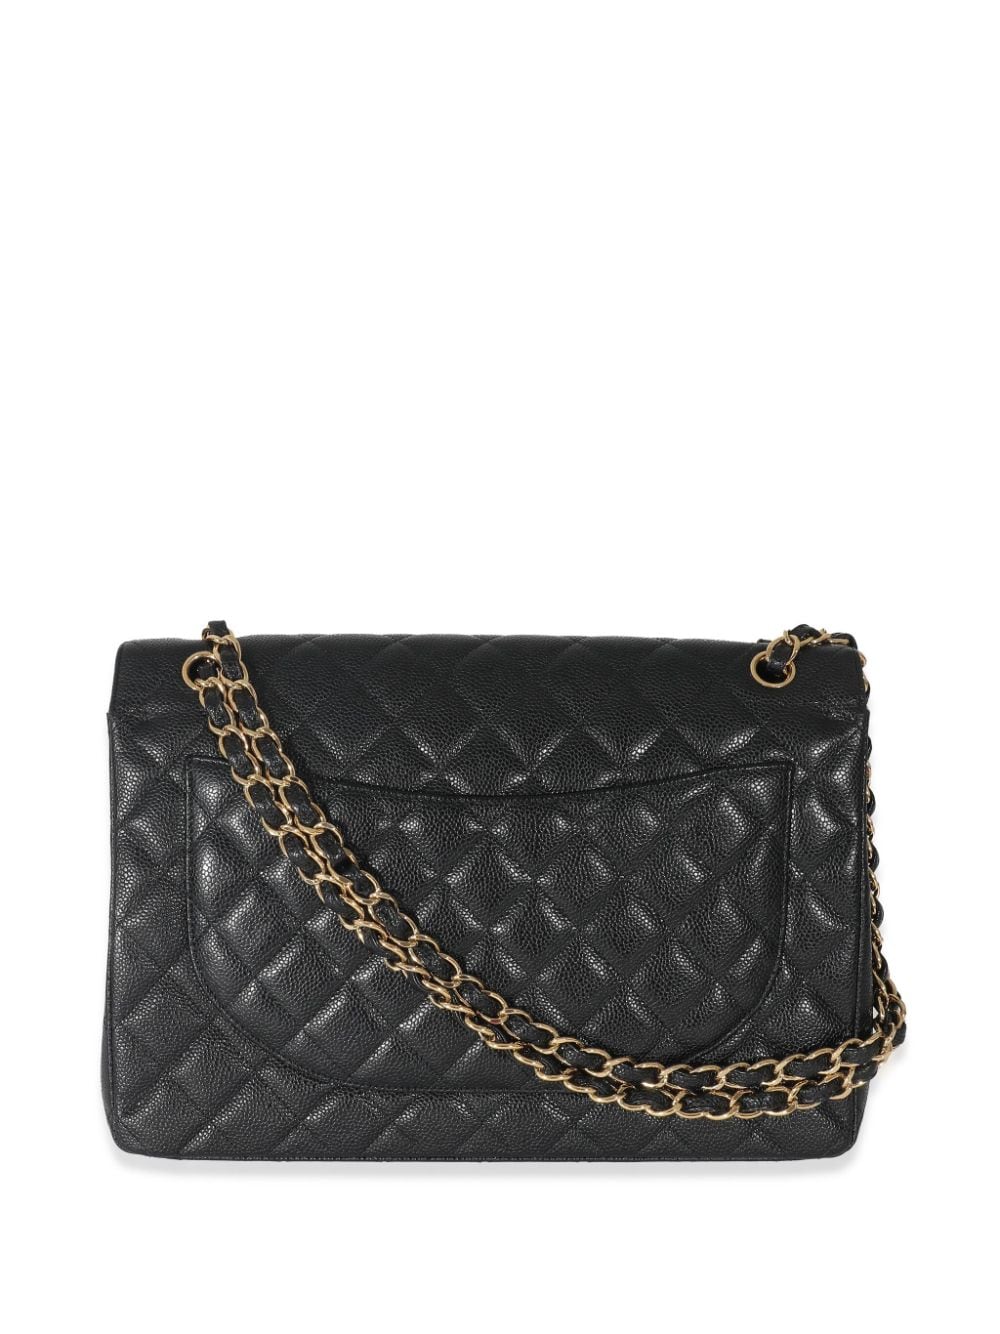 CHANEL Pre-Owned 2011 Large Double Flap Shoulder Bag - Farfetch